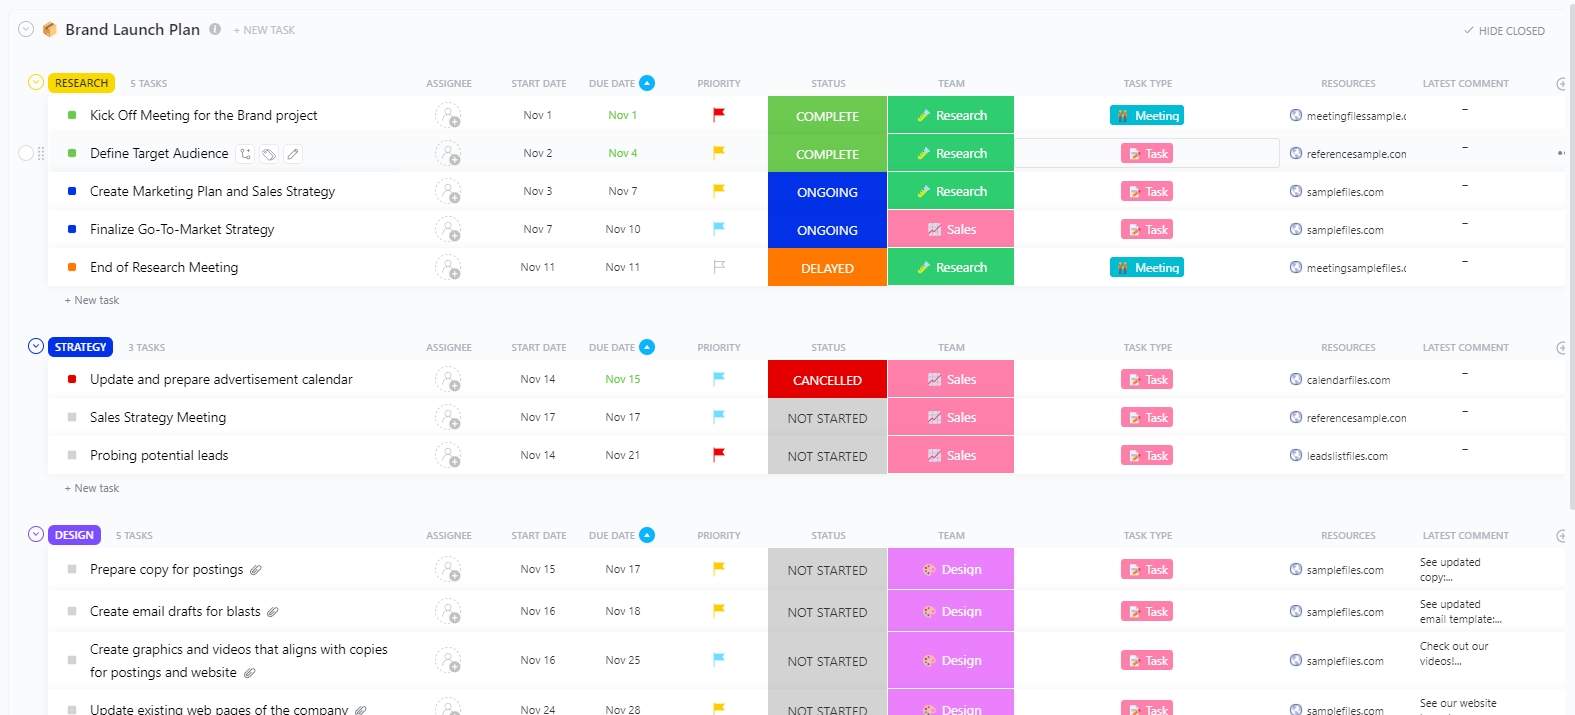 You can plan your latest brand launch here in ClickUp! This template enables your team to organize the project tasks for a bran launch which includes assigning the right person, setting the due dates, and listing all crucial deliverables.